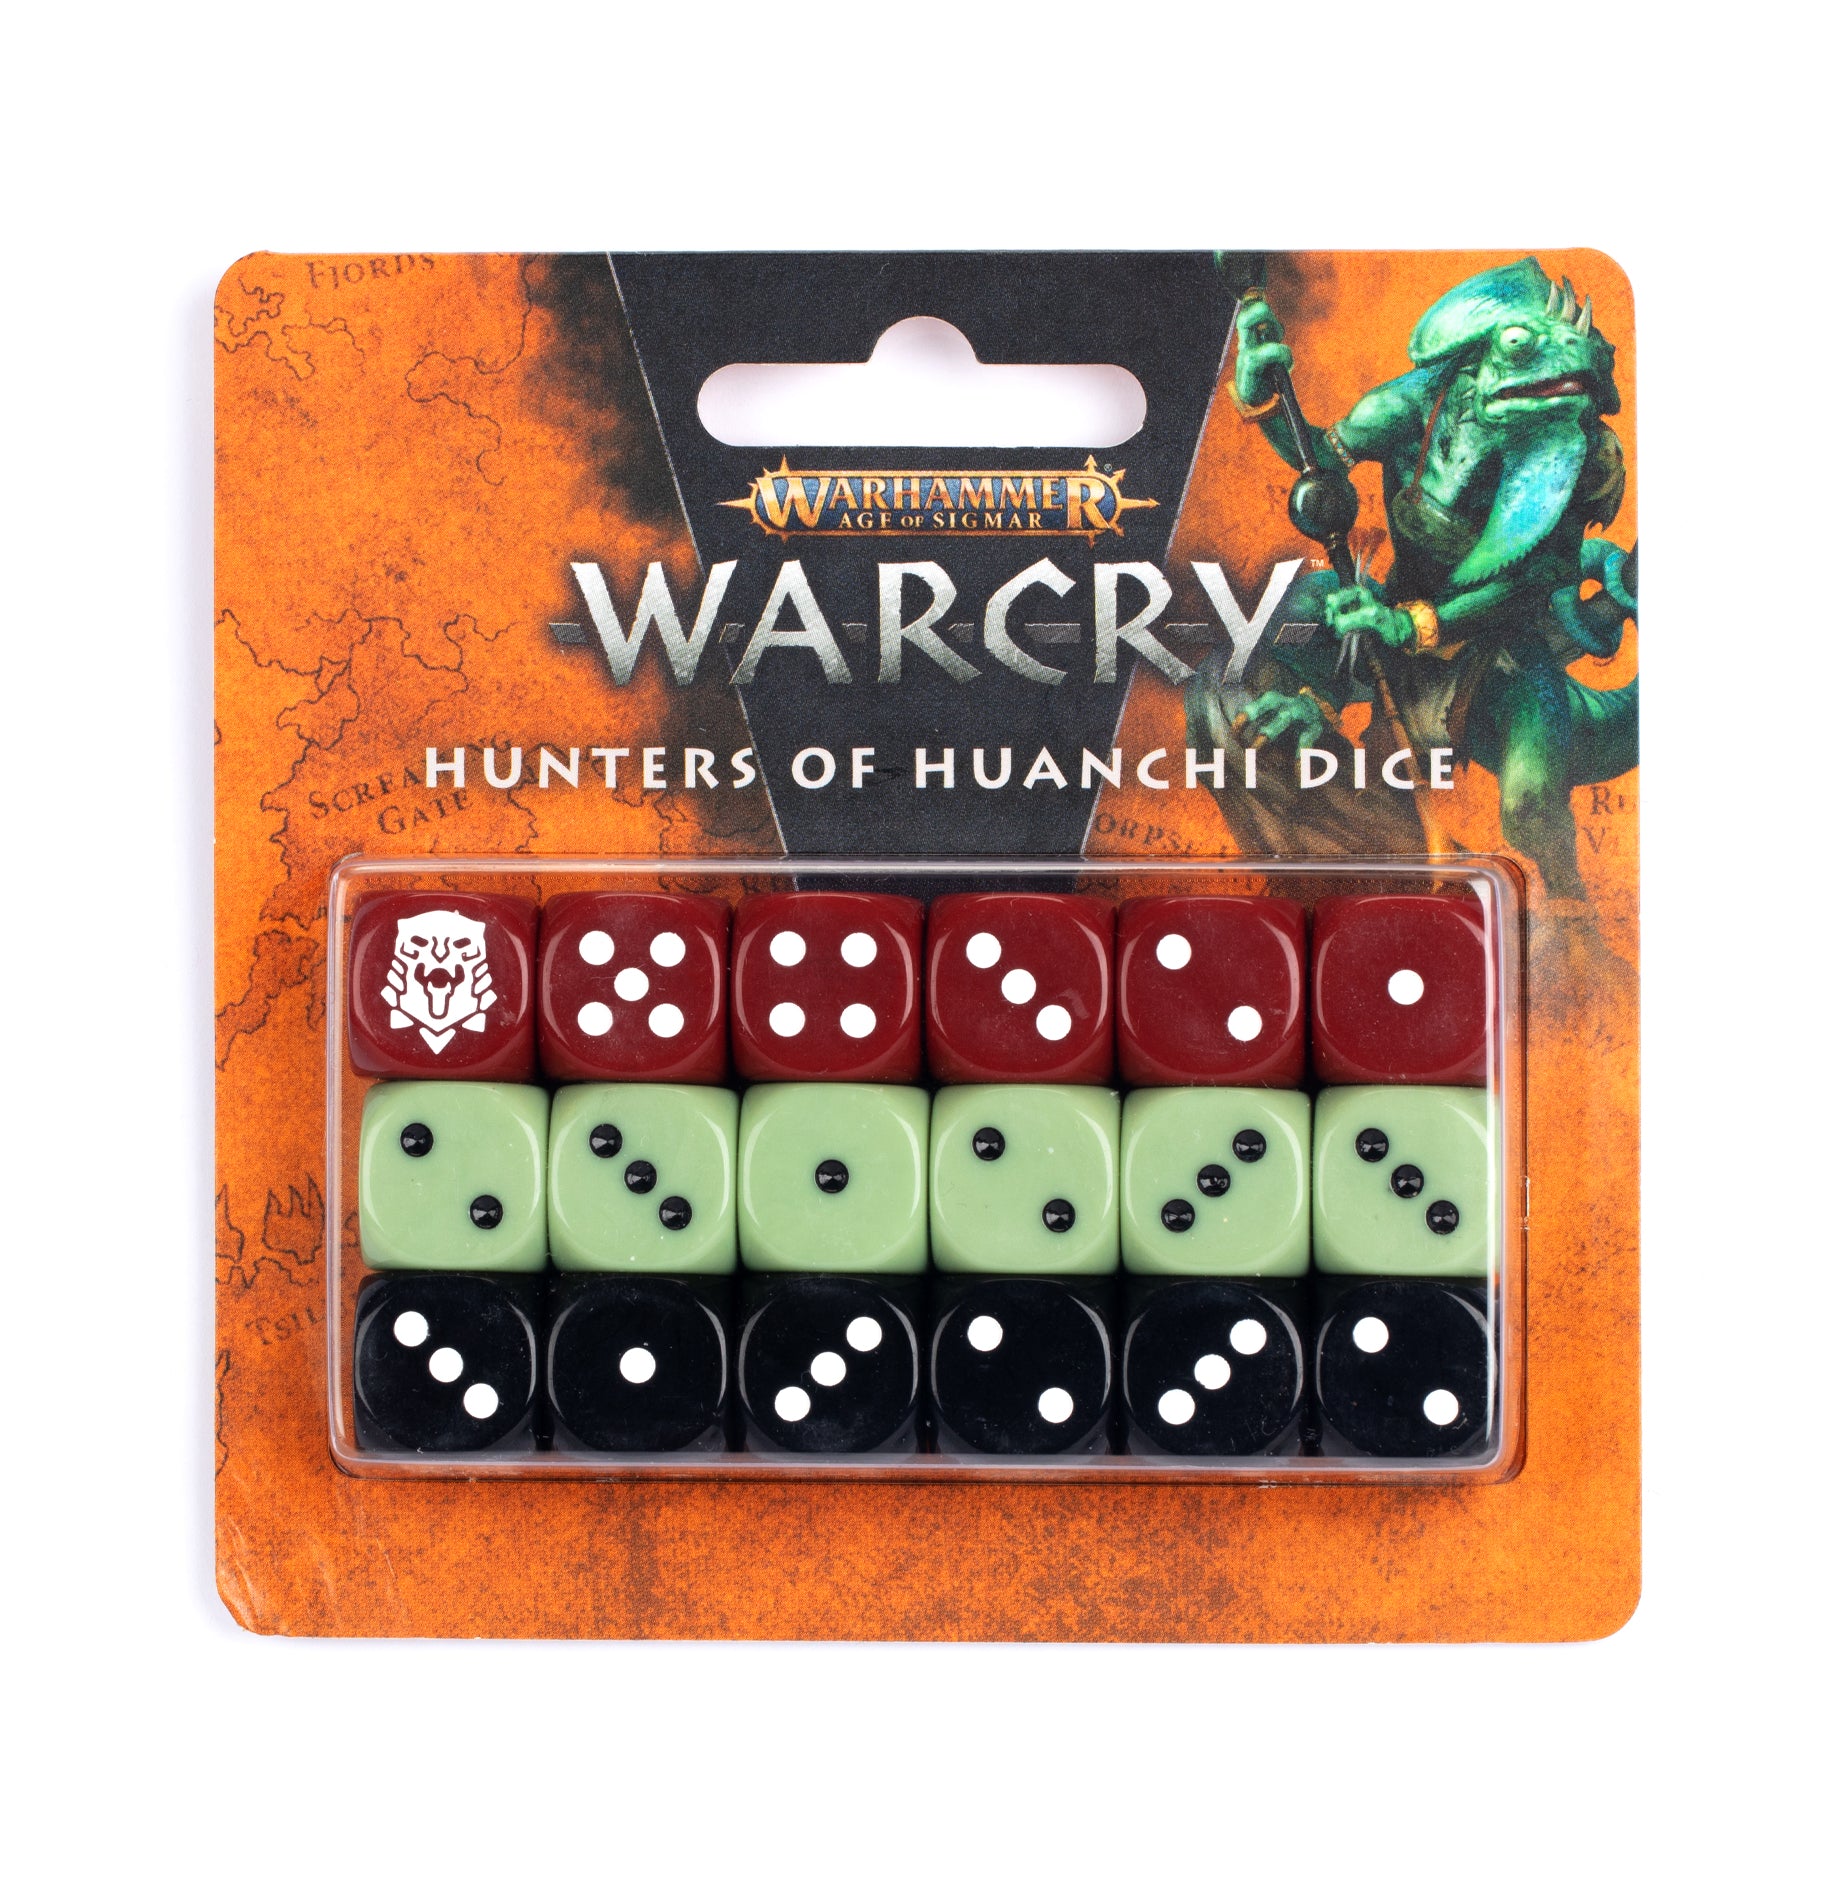 Warcry: Hunters of Huanchi Dice